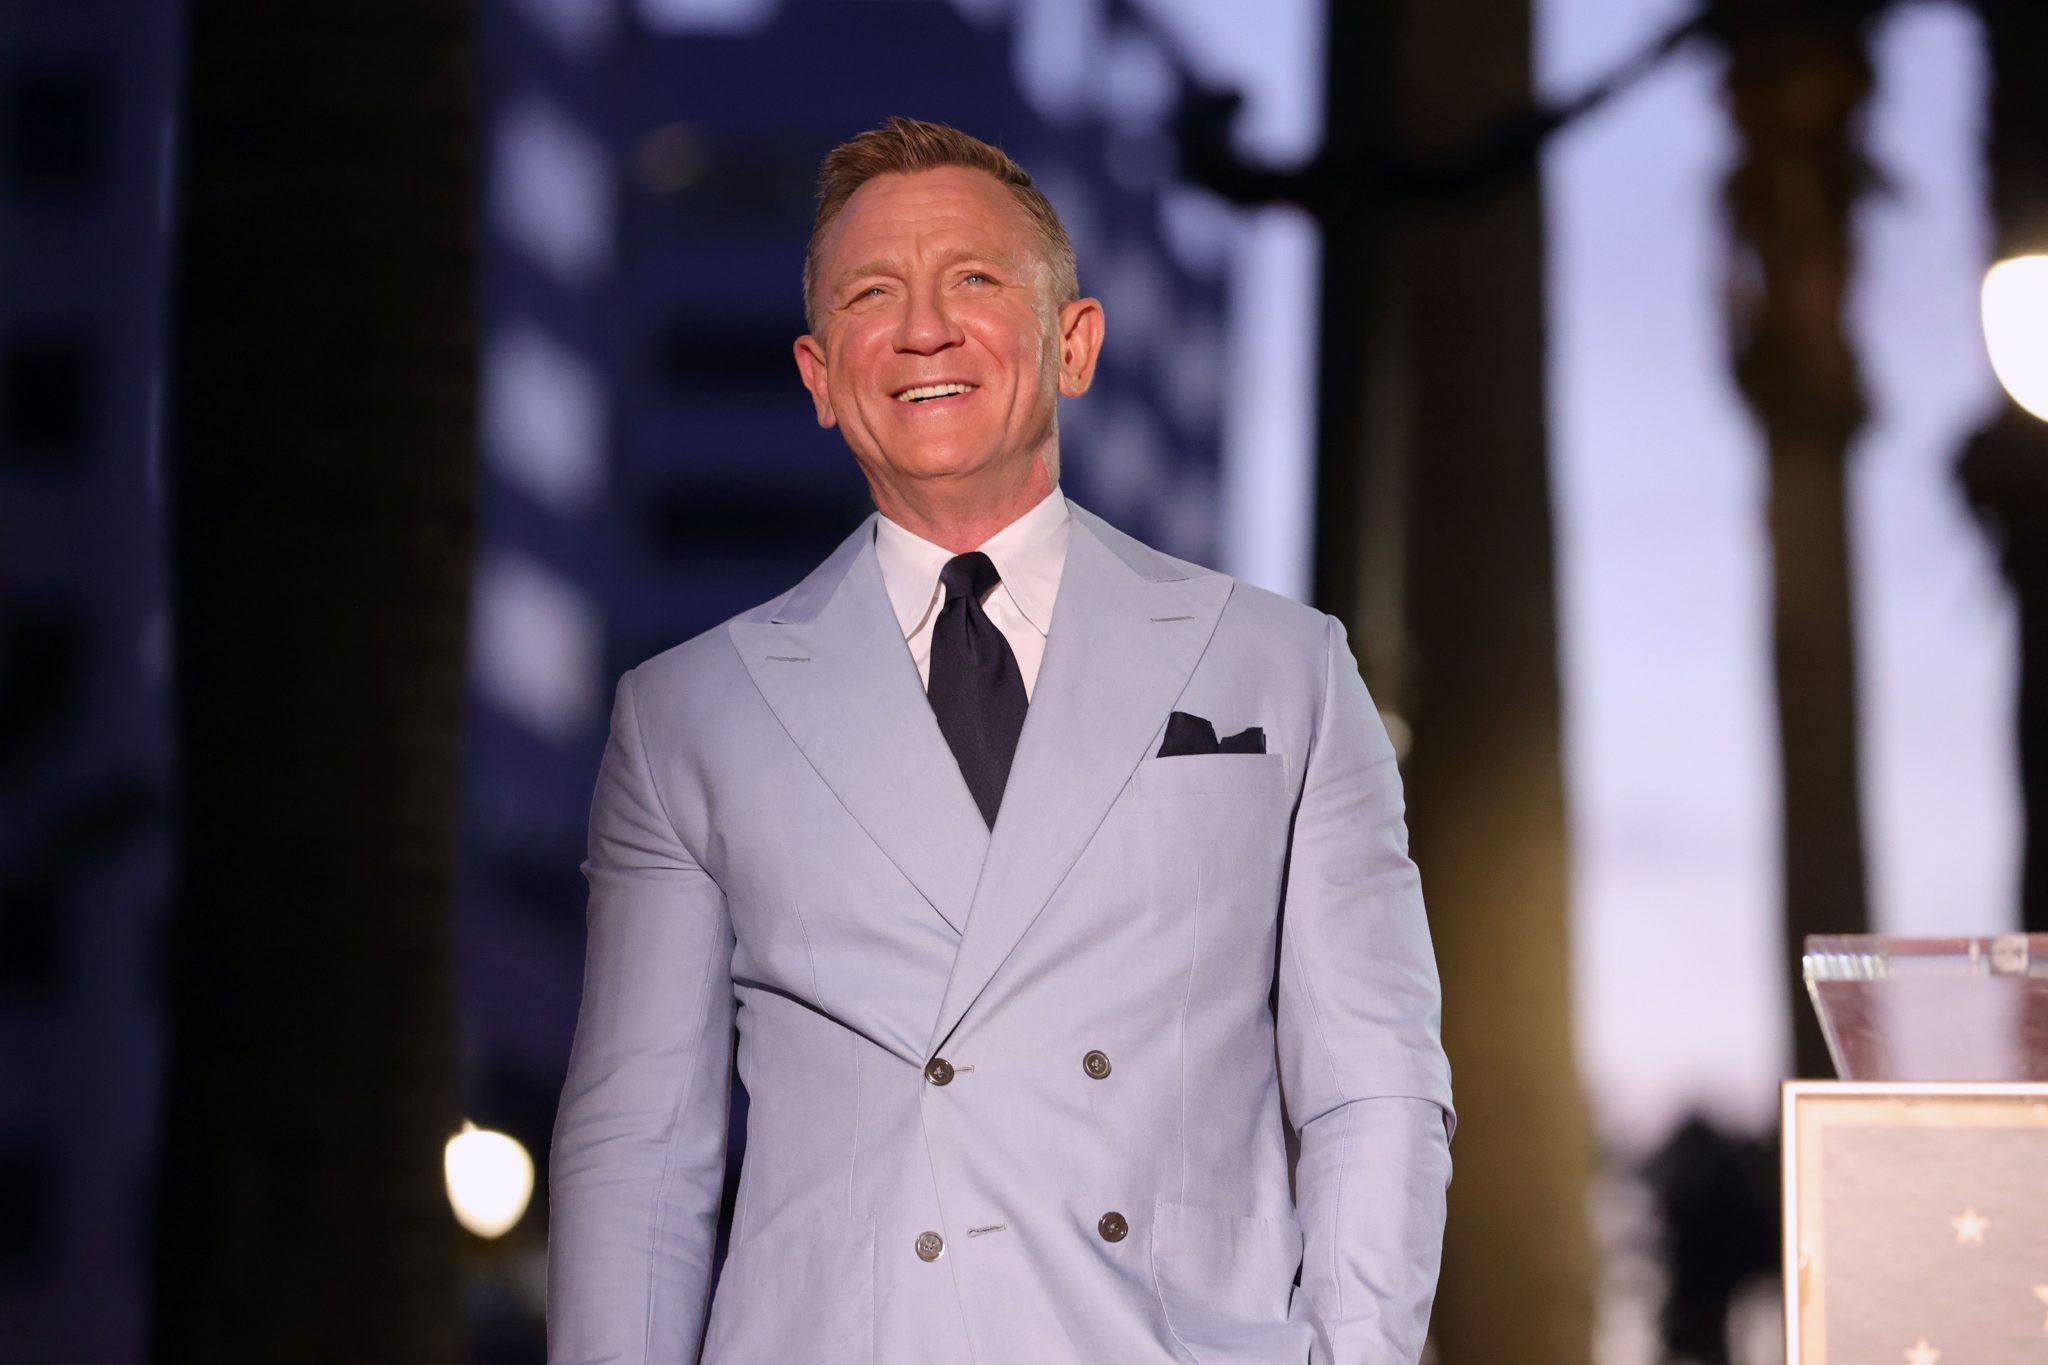 Daniel Craig says he often goes to gay bars to get away from aggressive men